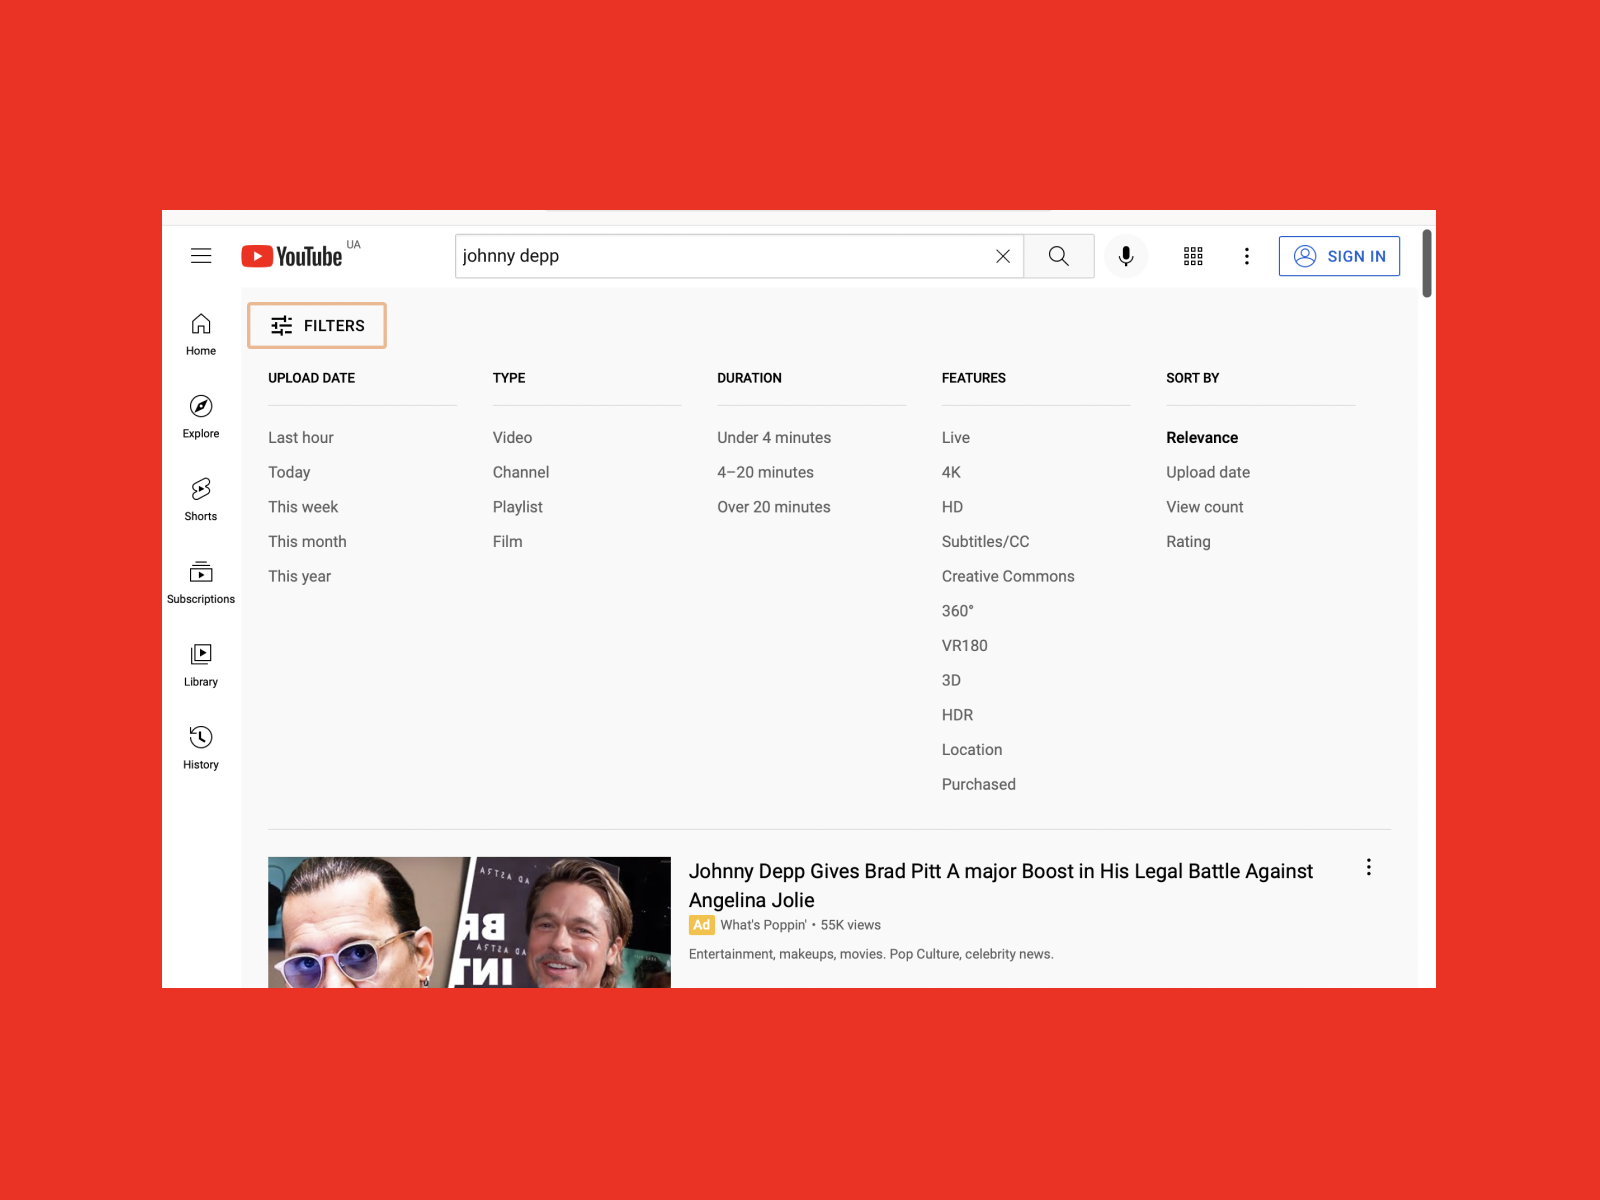 Example of YouTube’s search functionality